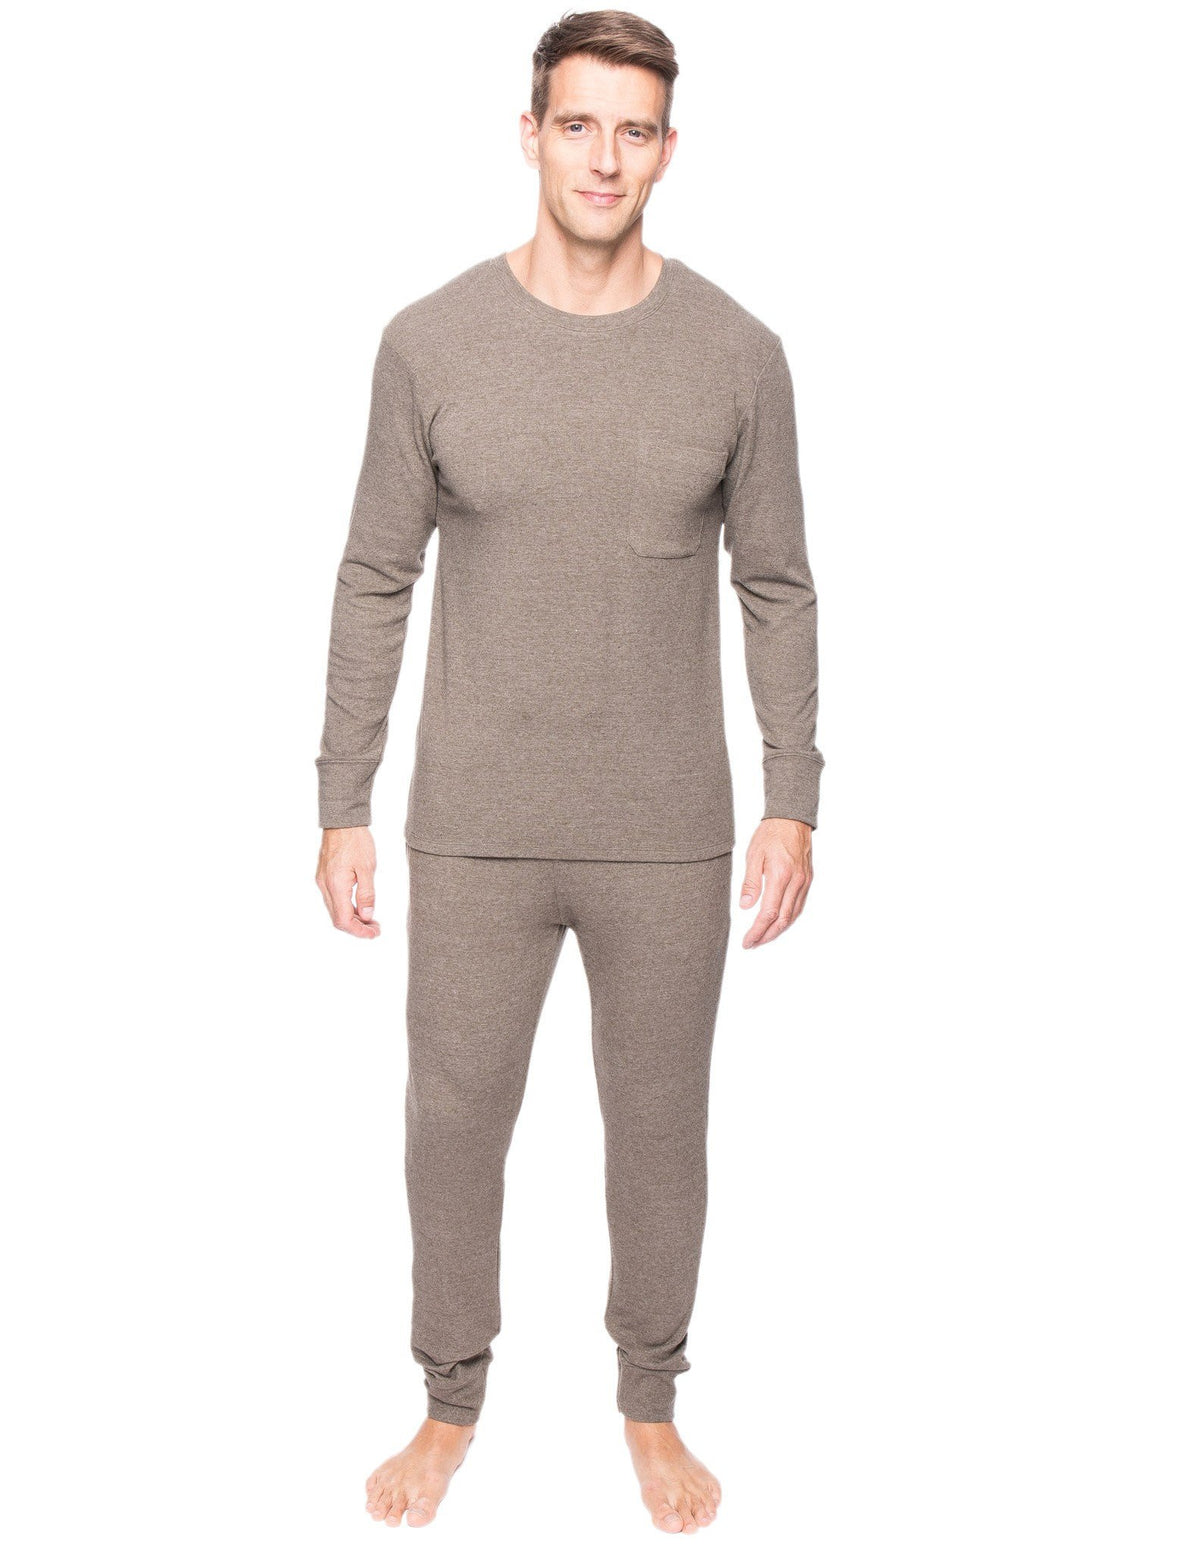 Most comfortable pajamas top for men